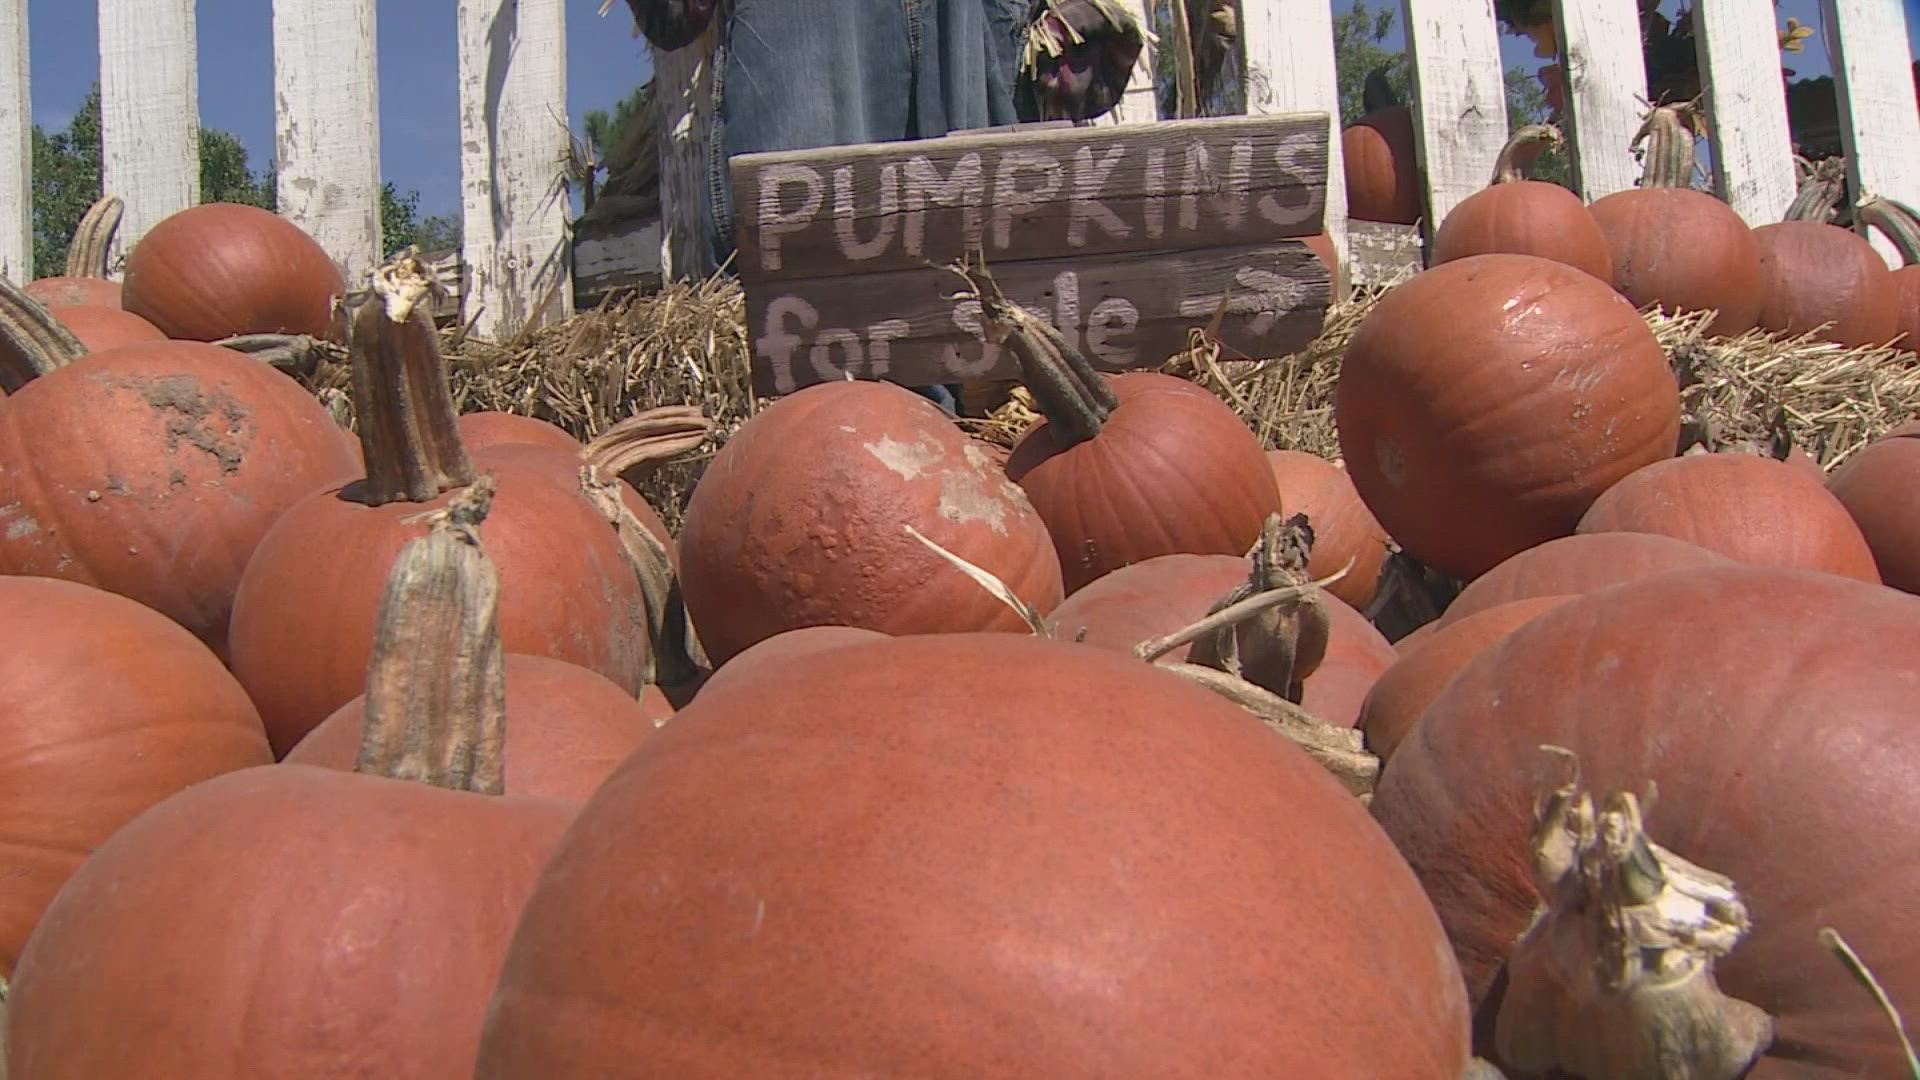 The owners of Hall’s Pumpkin Farm in Grapevine said they had to pay more to get their pumpkins in this year.